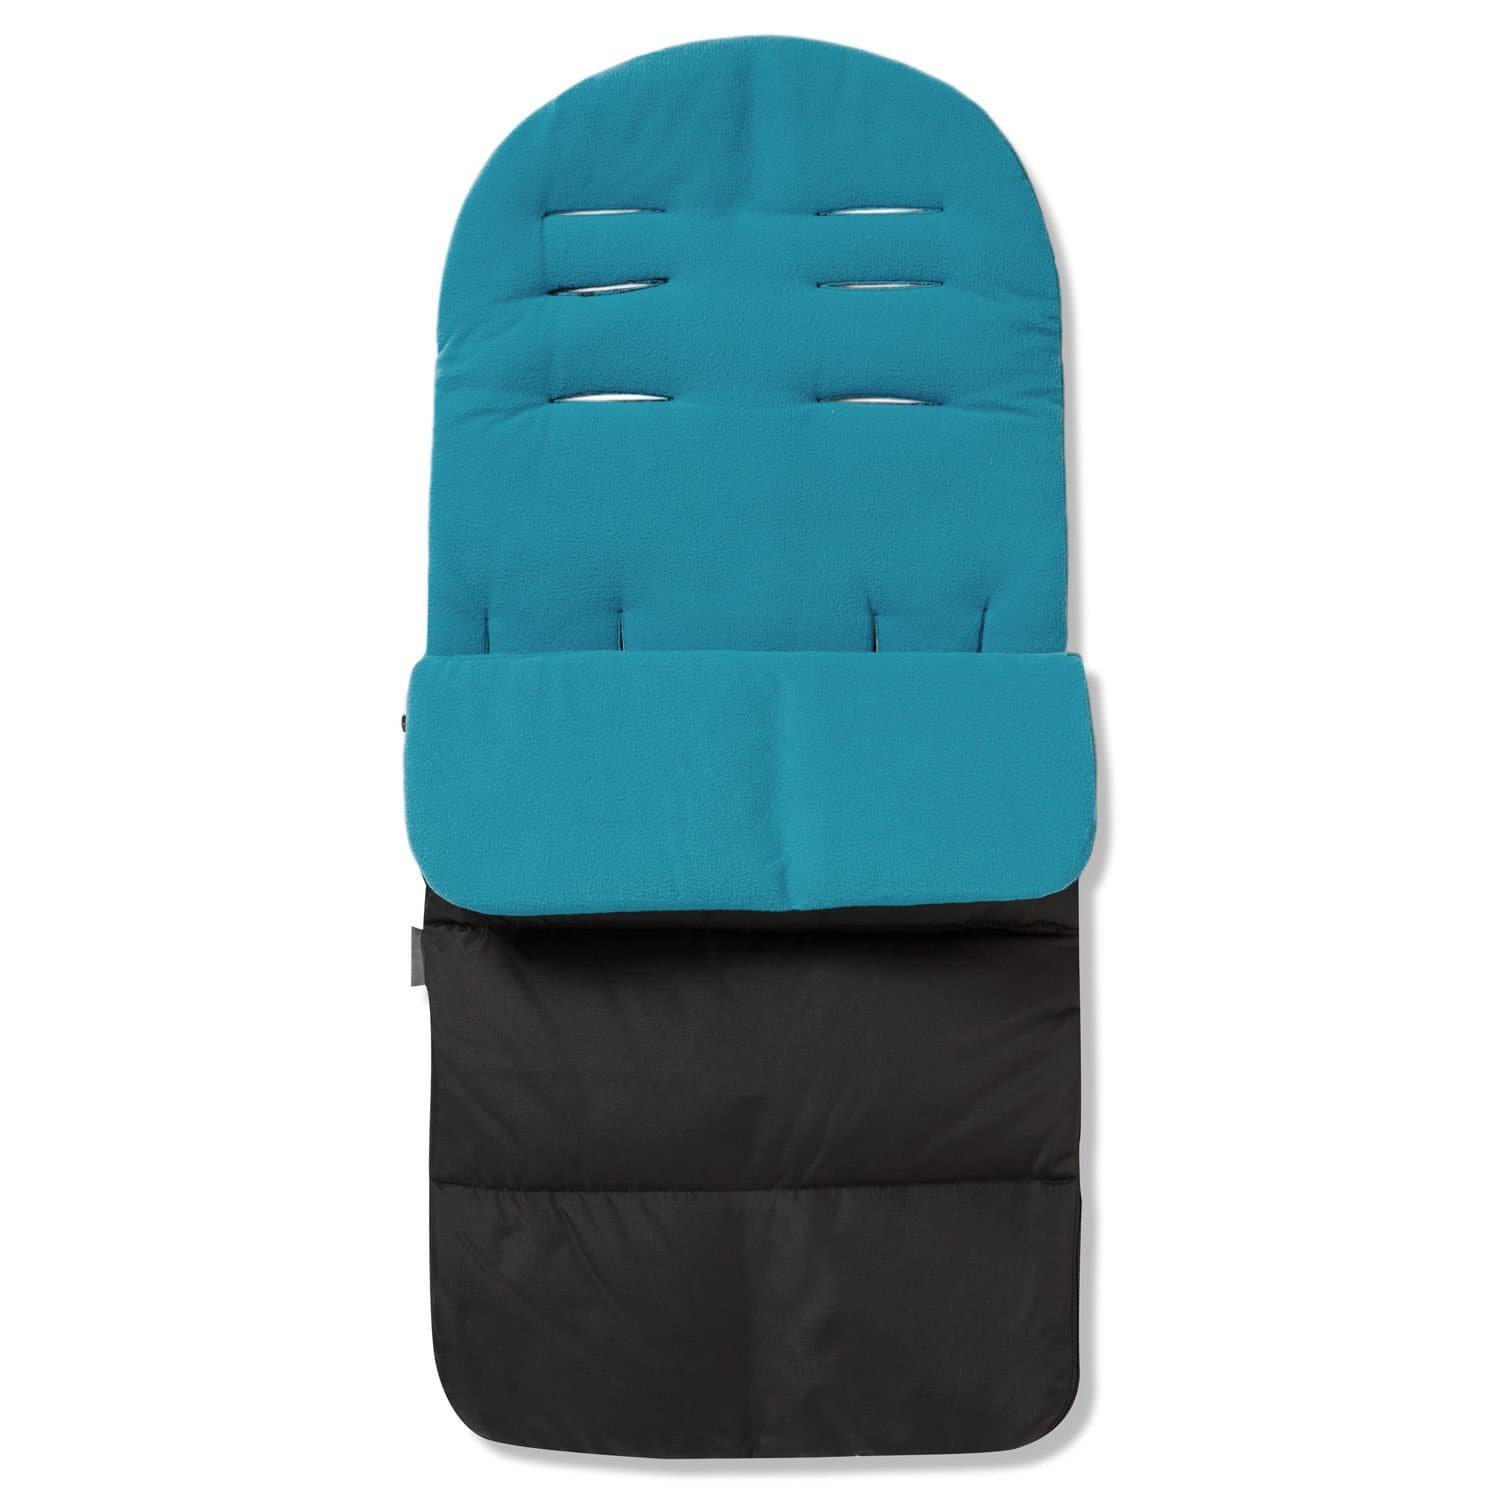 Premium Footmuff / Cosy Toes Compatible with Gesslein - Ocean Blue / Fits All Models | For Your Little One